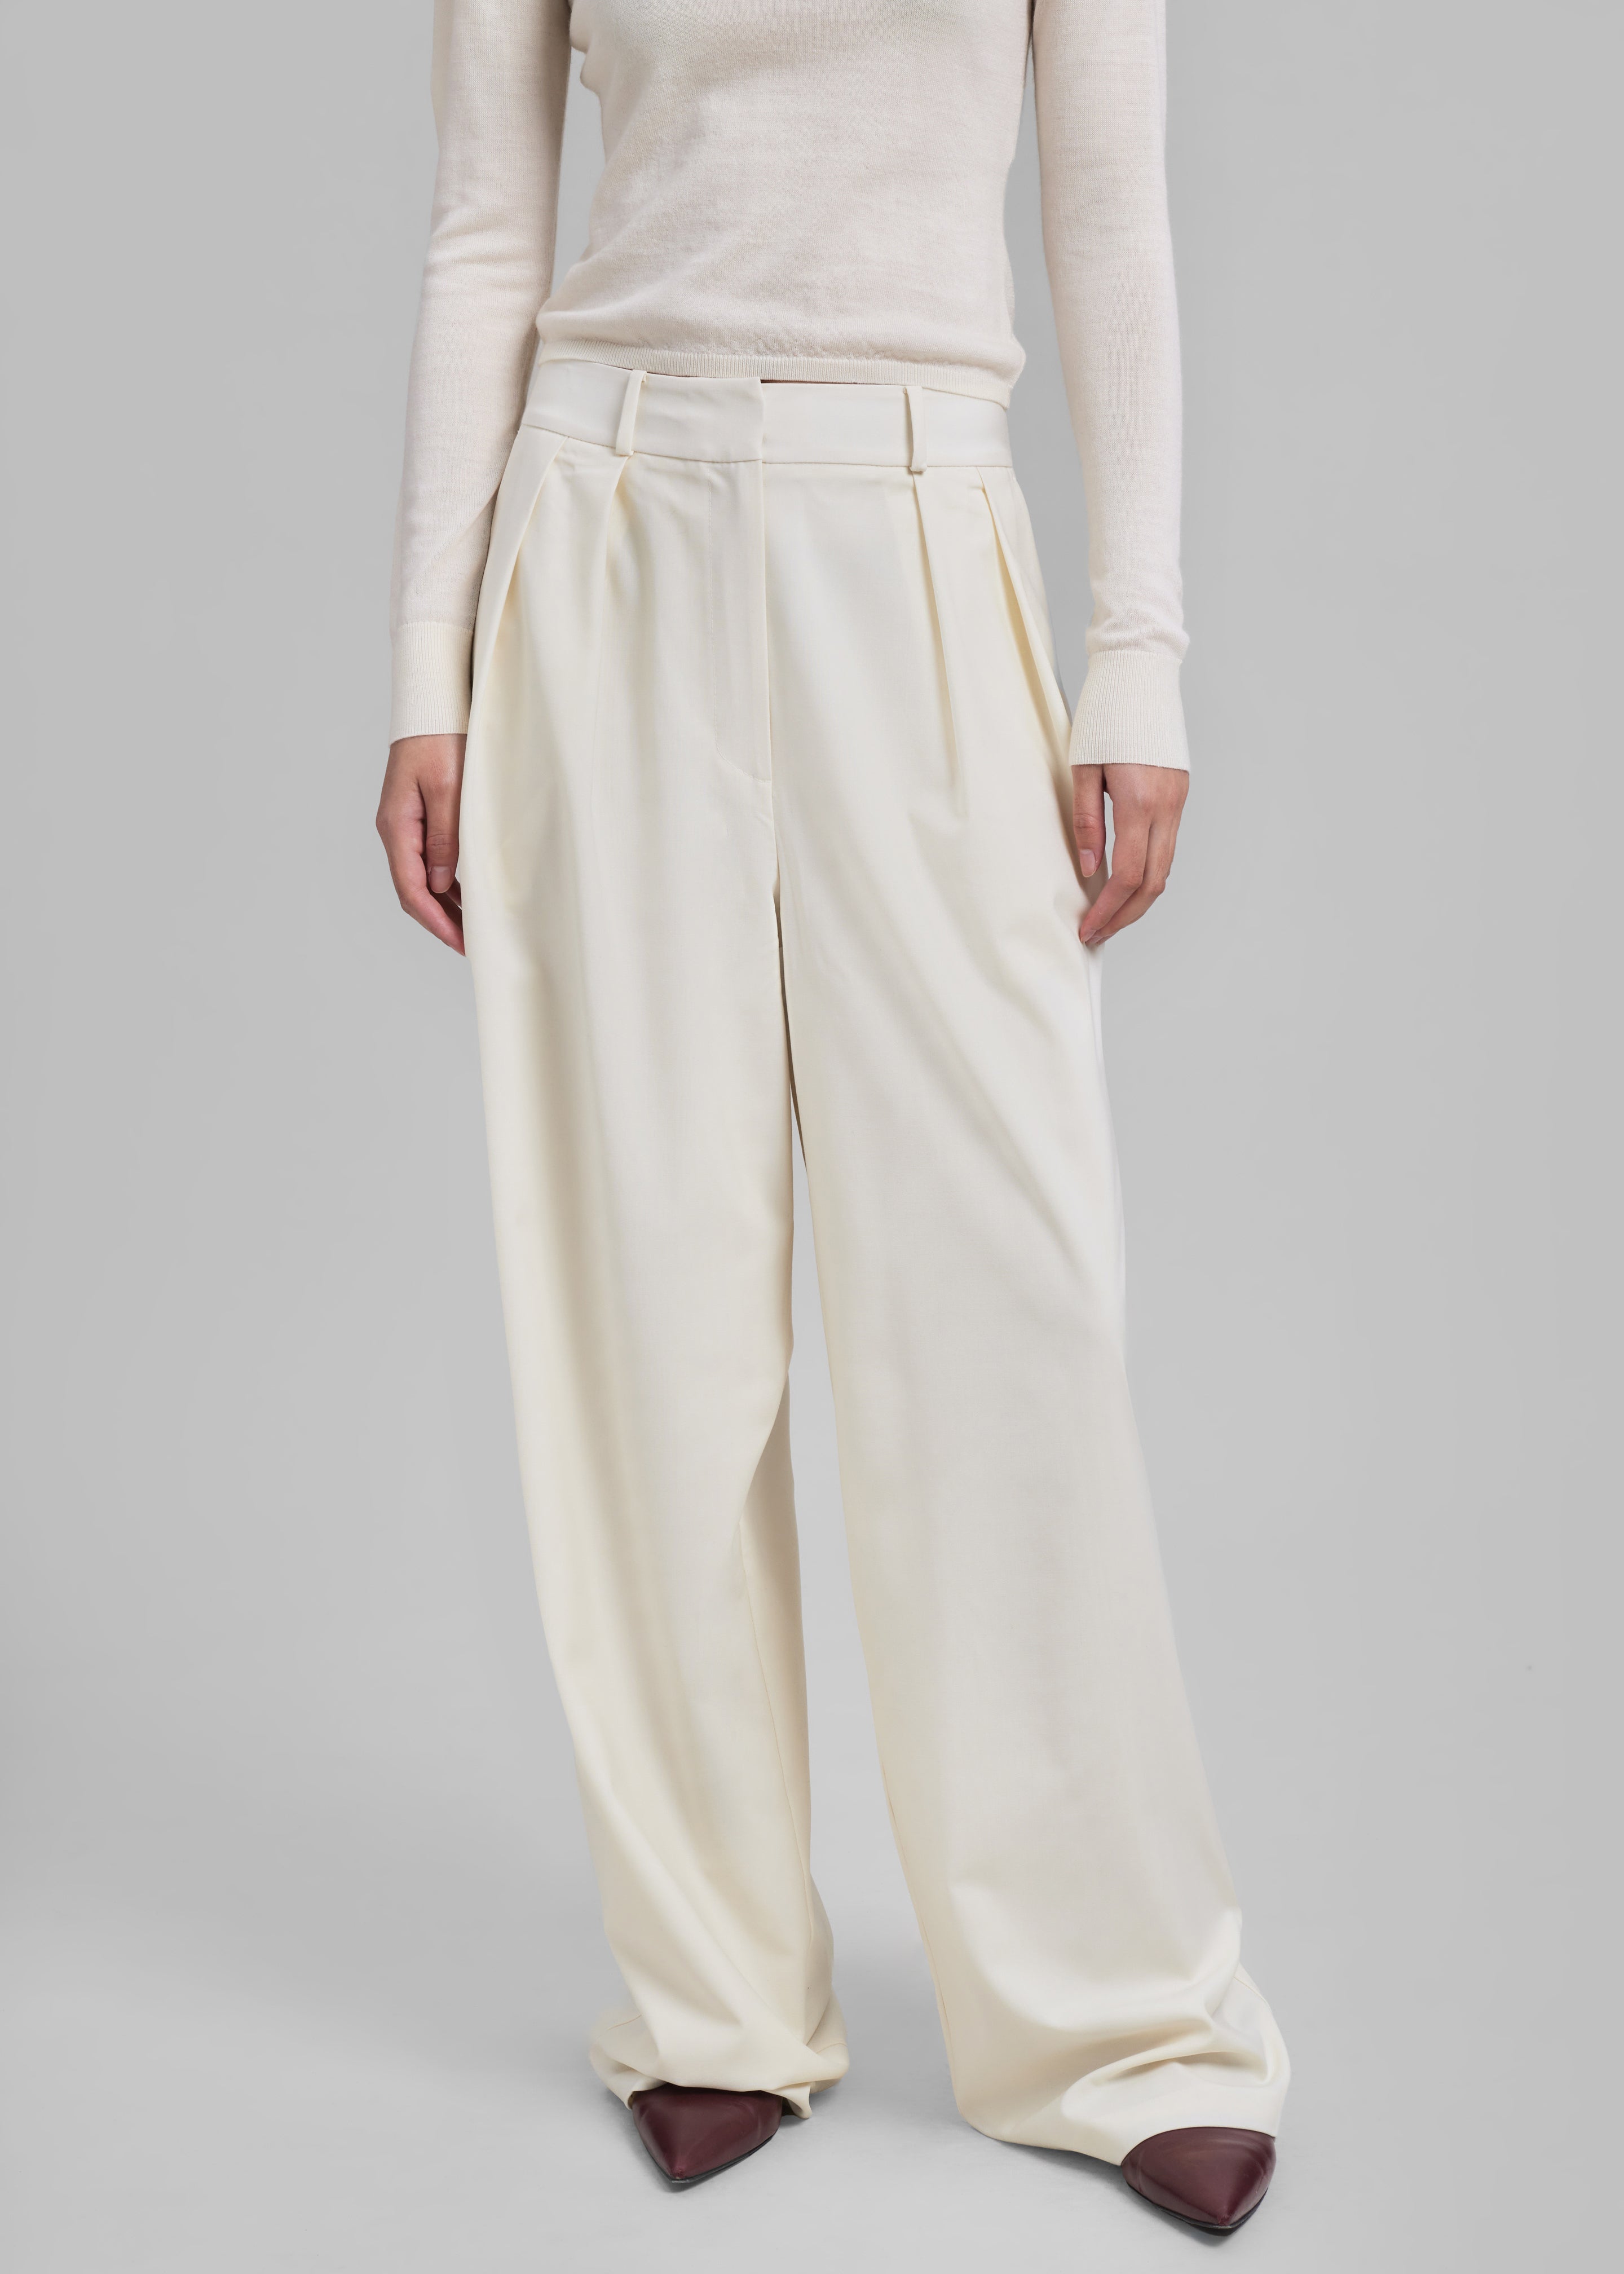 Ripley Pleated Trousers - Ivory